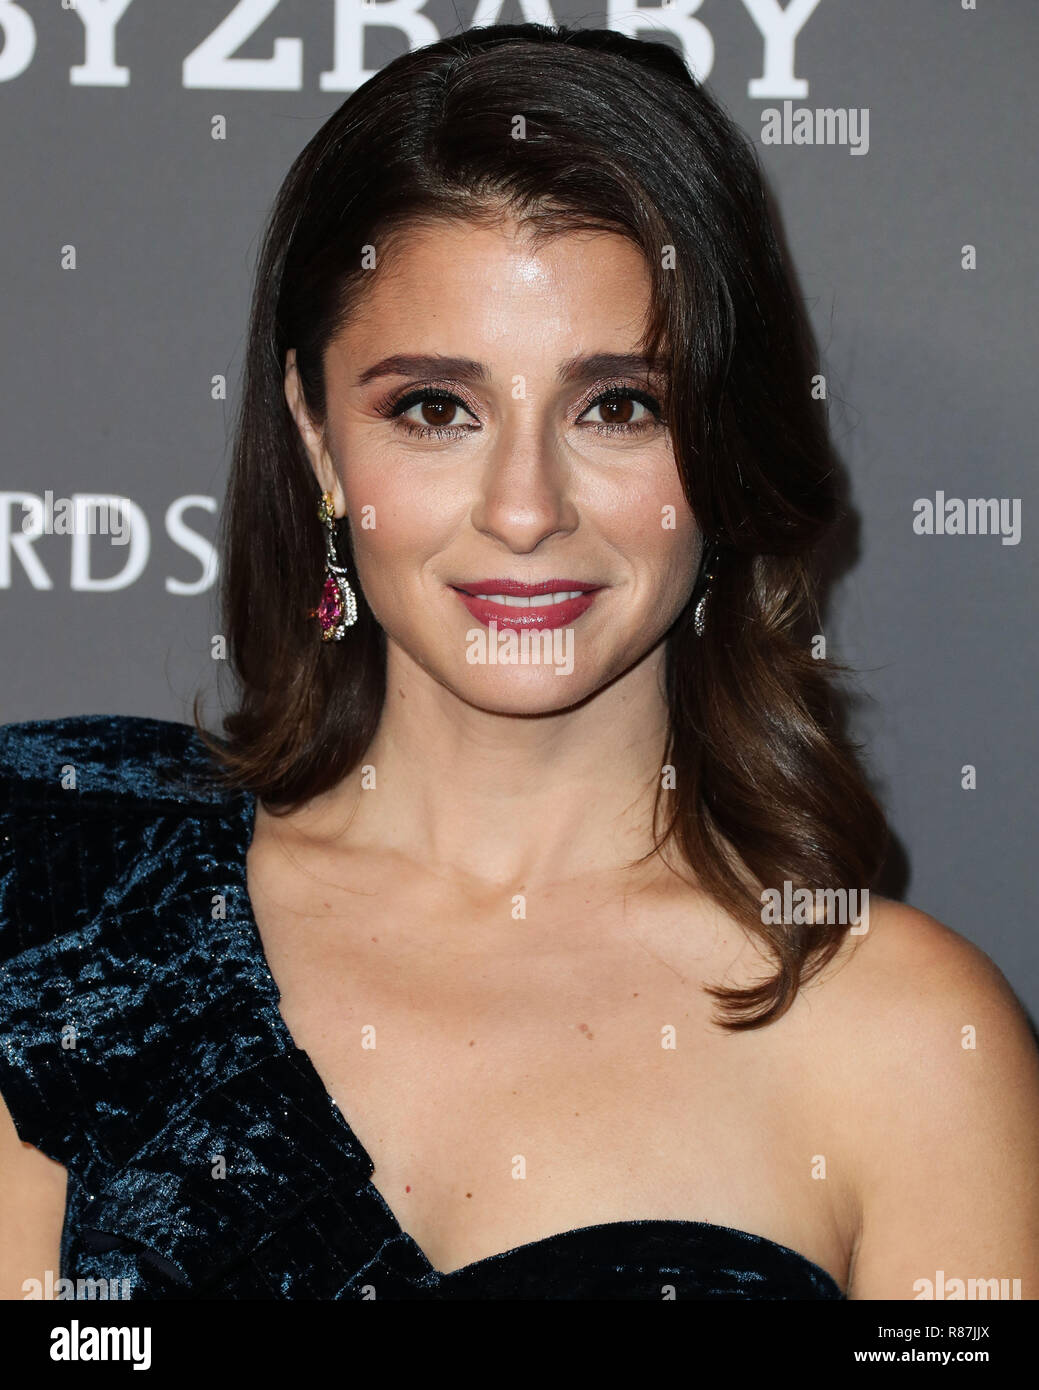 CULVER CITY, LOS ANGELES, CA, USA - NOVEMBER 10: Actress Shiri Appleby wearing an ML Monique Lhuillier gown arrives at the 2018 Baby2Baby Gala held at 3Labs on November 10, 2018 in Culver City, Los Angeles, California, United States. (Photo by Xavier Collin/Image Press Agency) Stock Photo